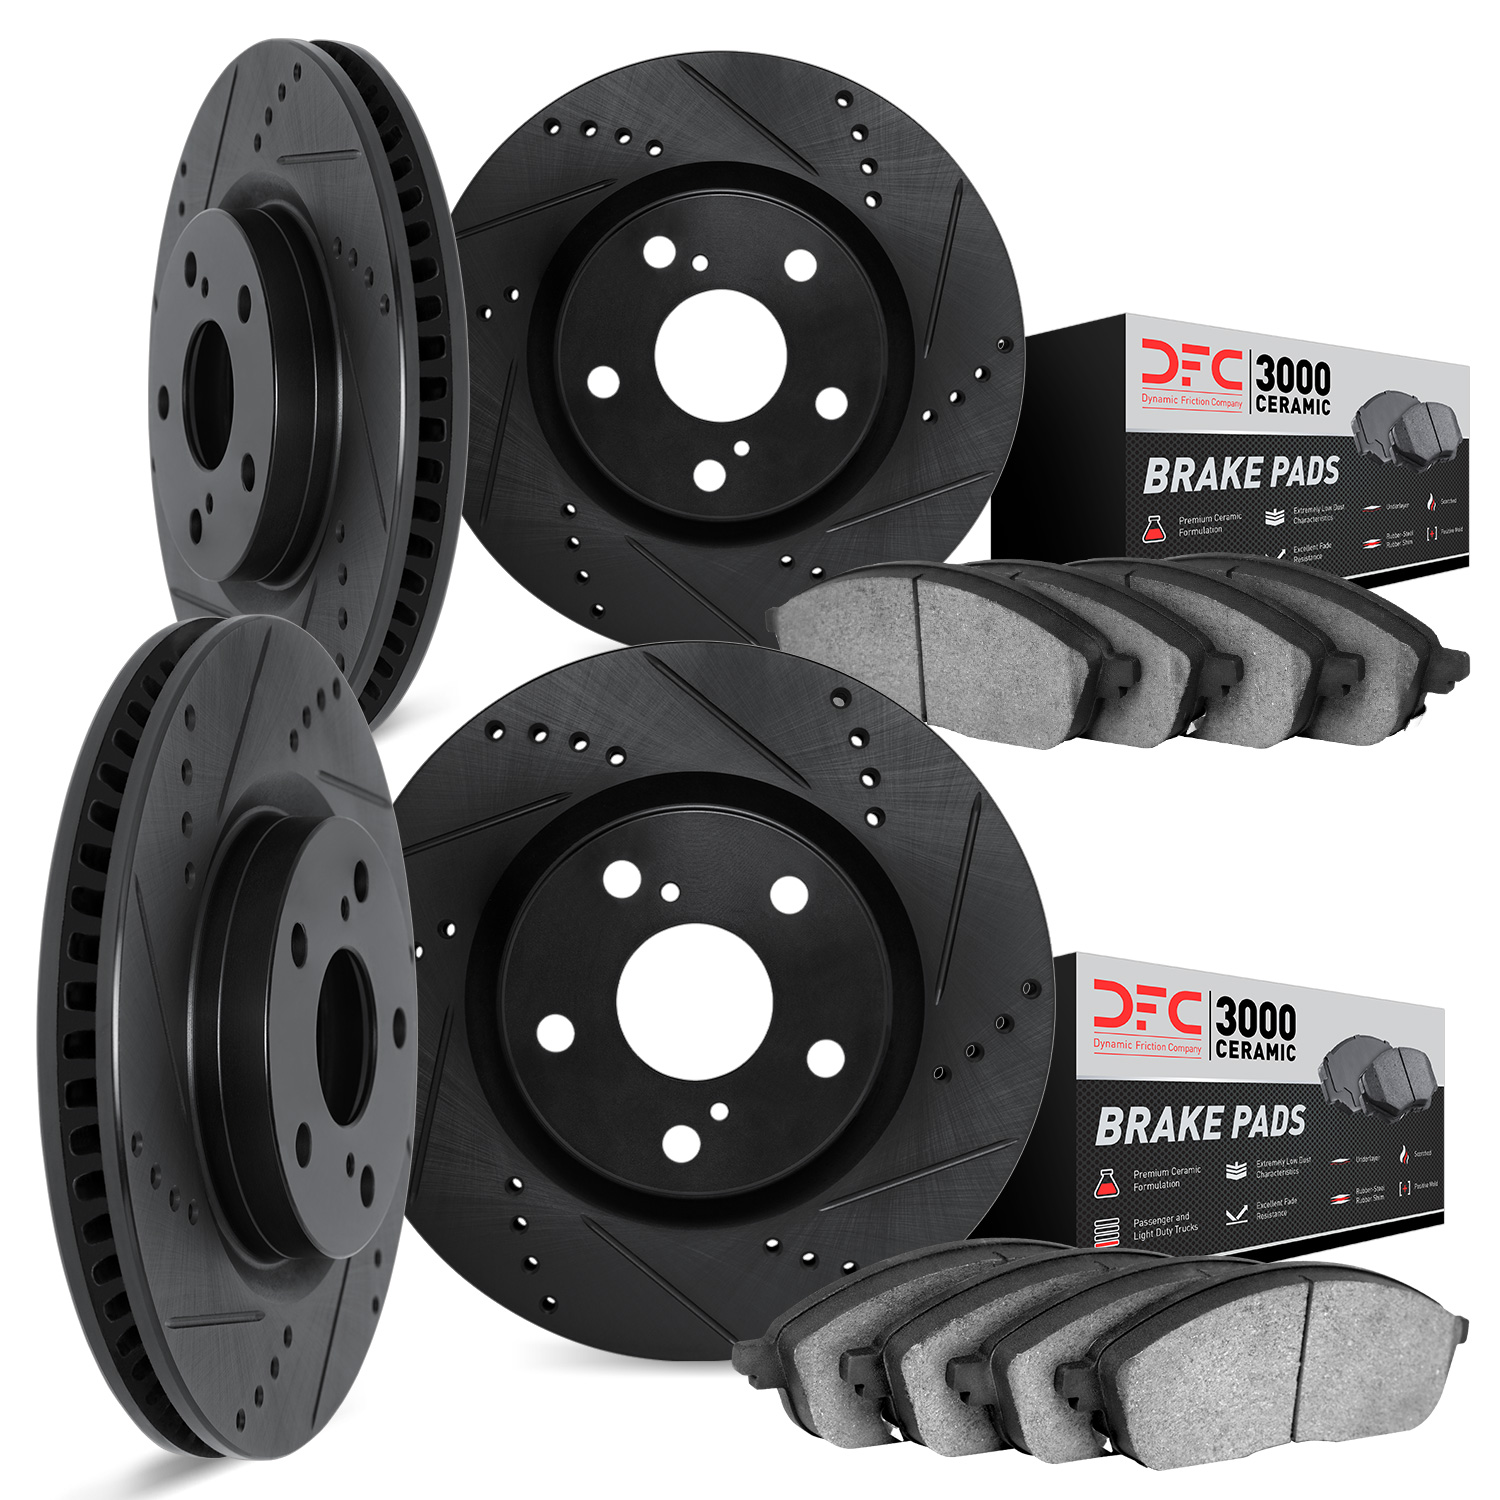 8304-31085 Drilled/Slotted Brake Rotors with 3000-Series Ceramic Brake Pads Kit [Black], 2013-2018 BMW, Position: Front and Rear